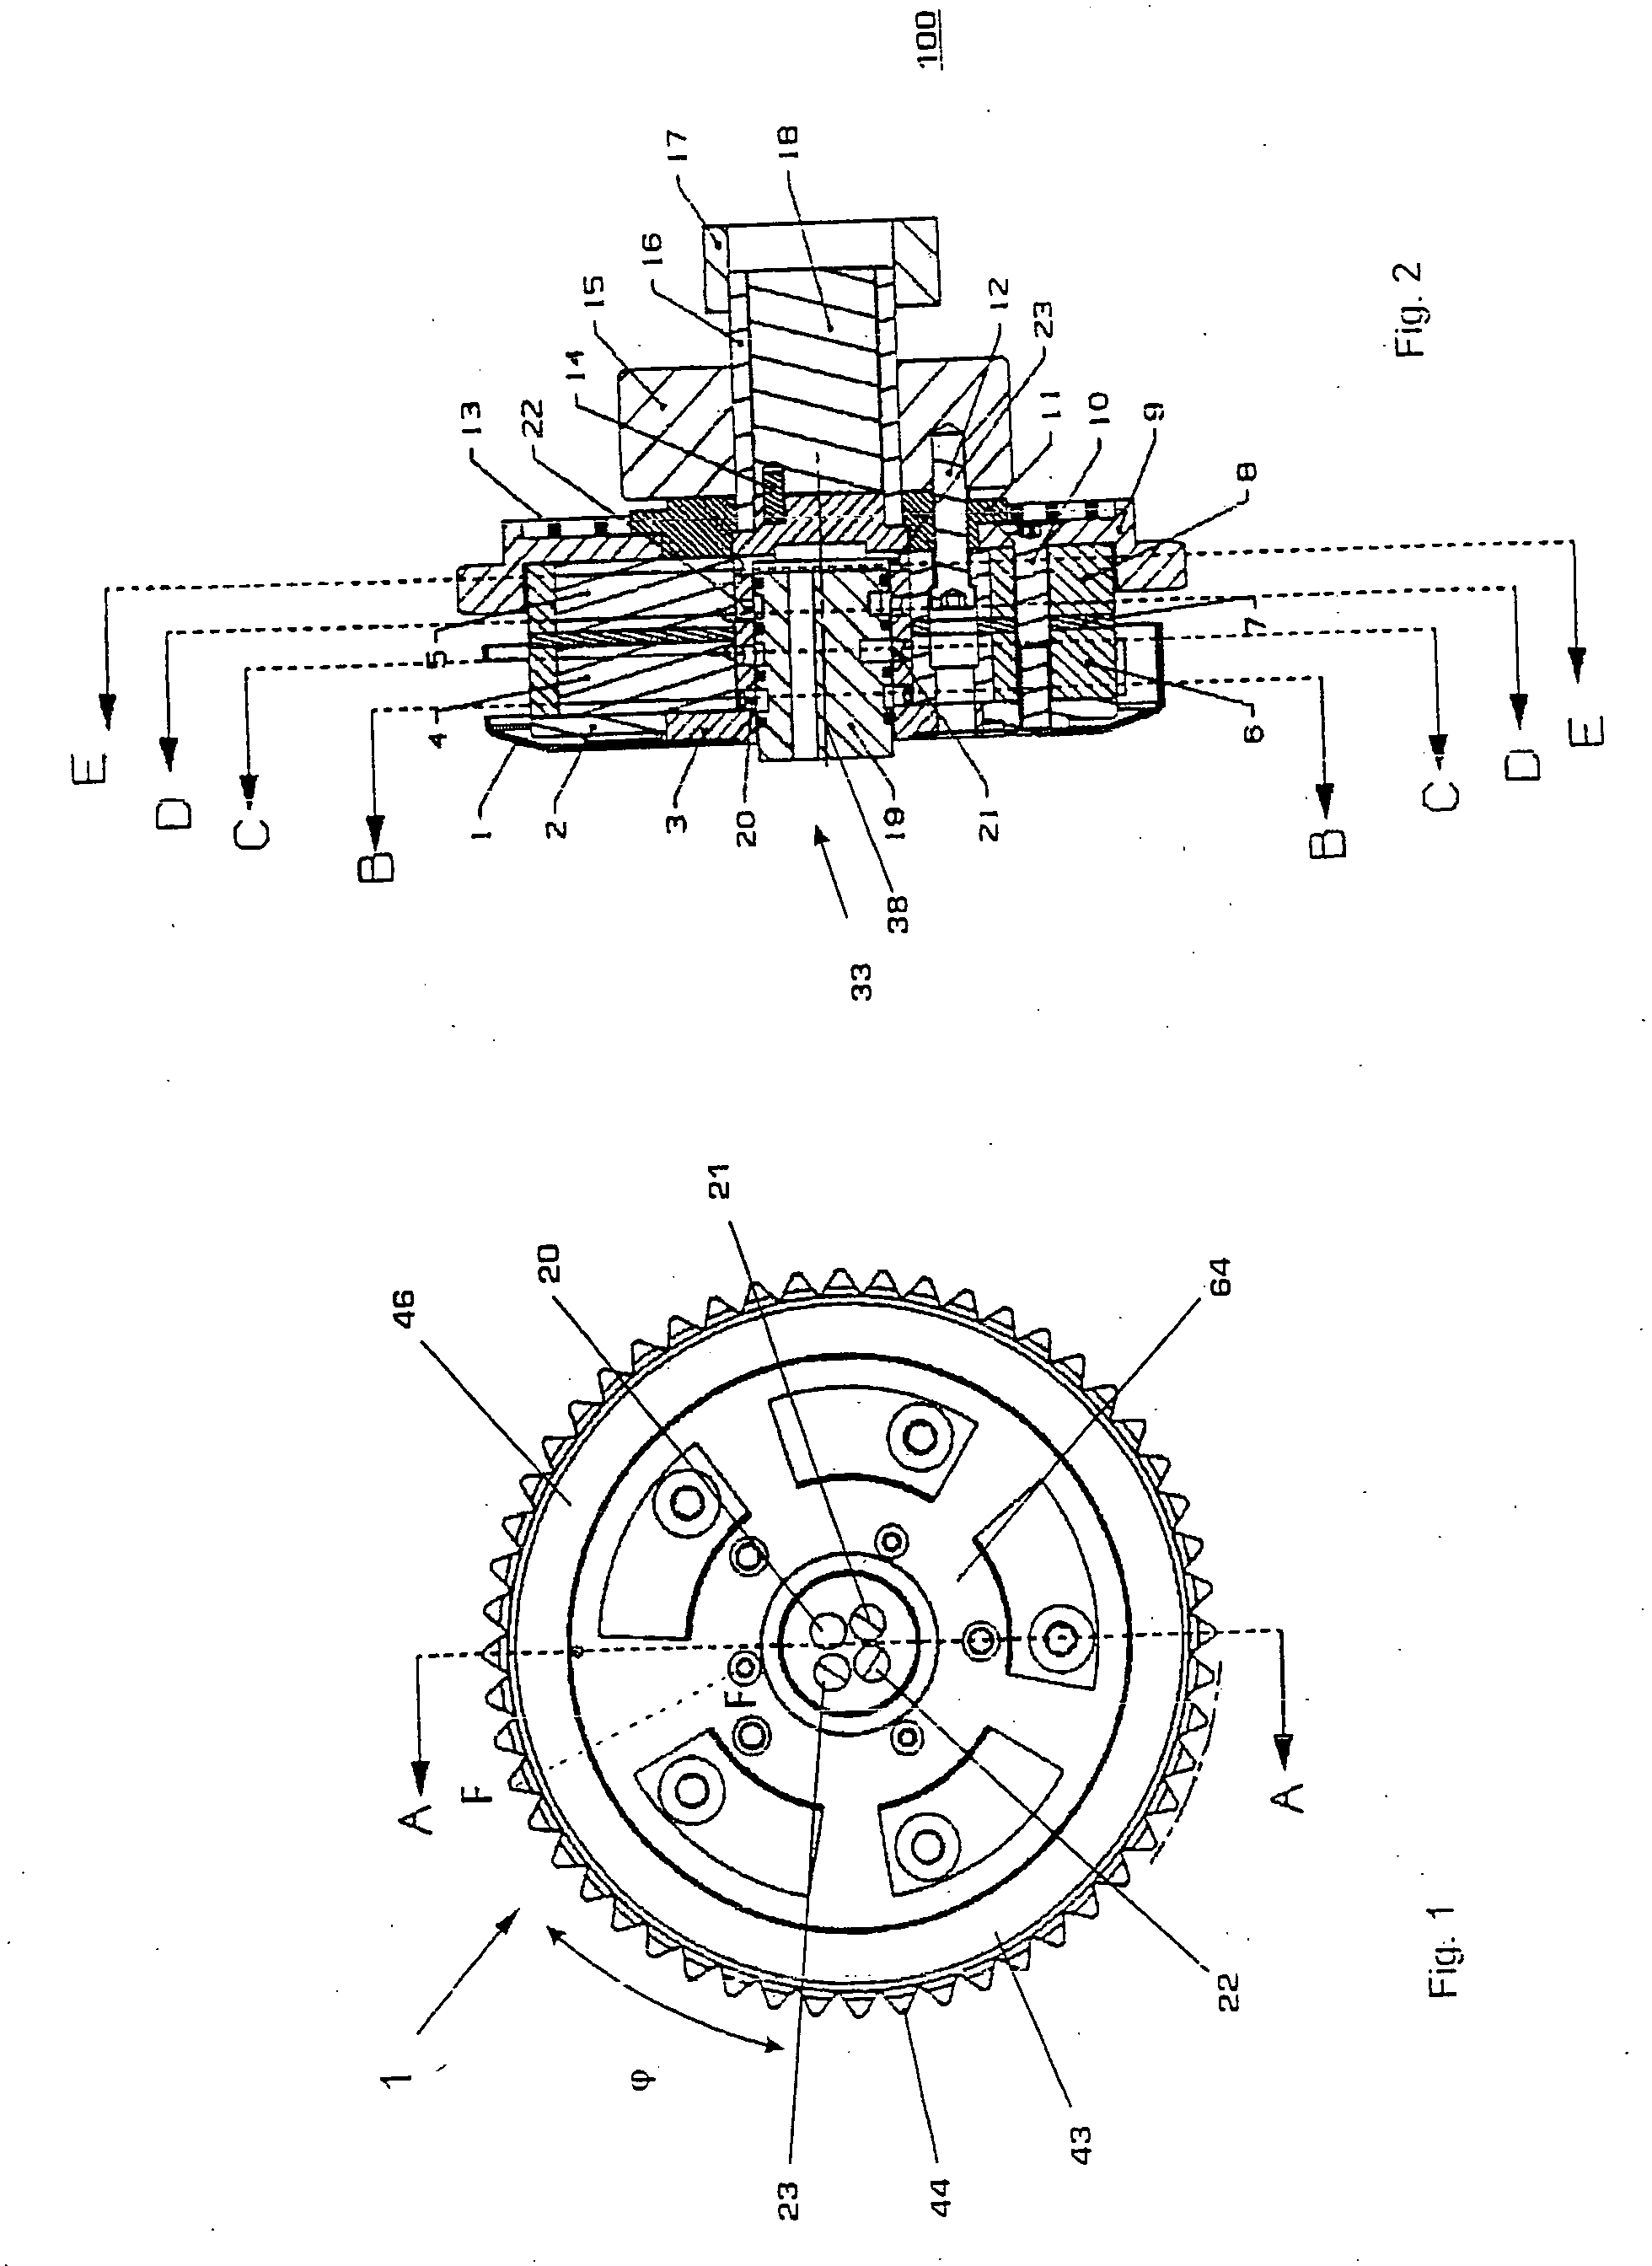 Doubled cam shaft adjuster in layered construction